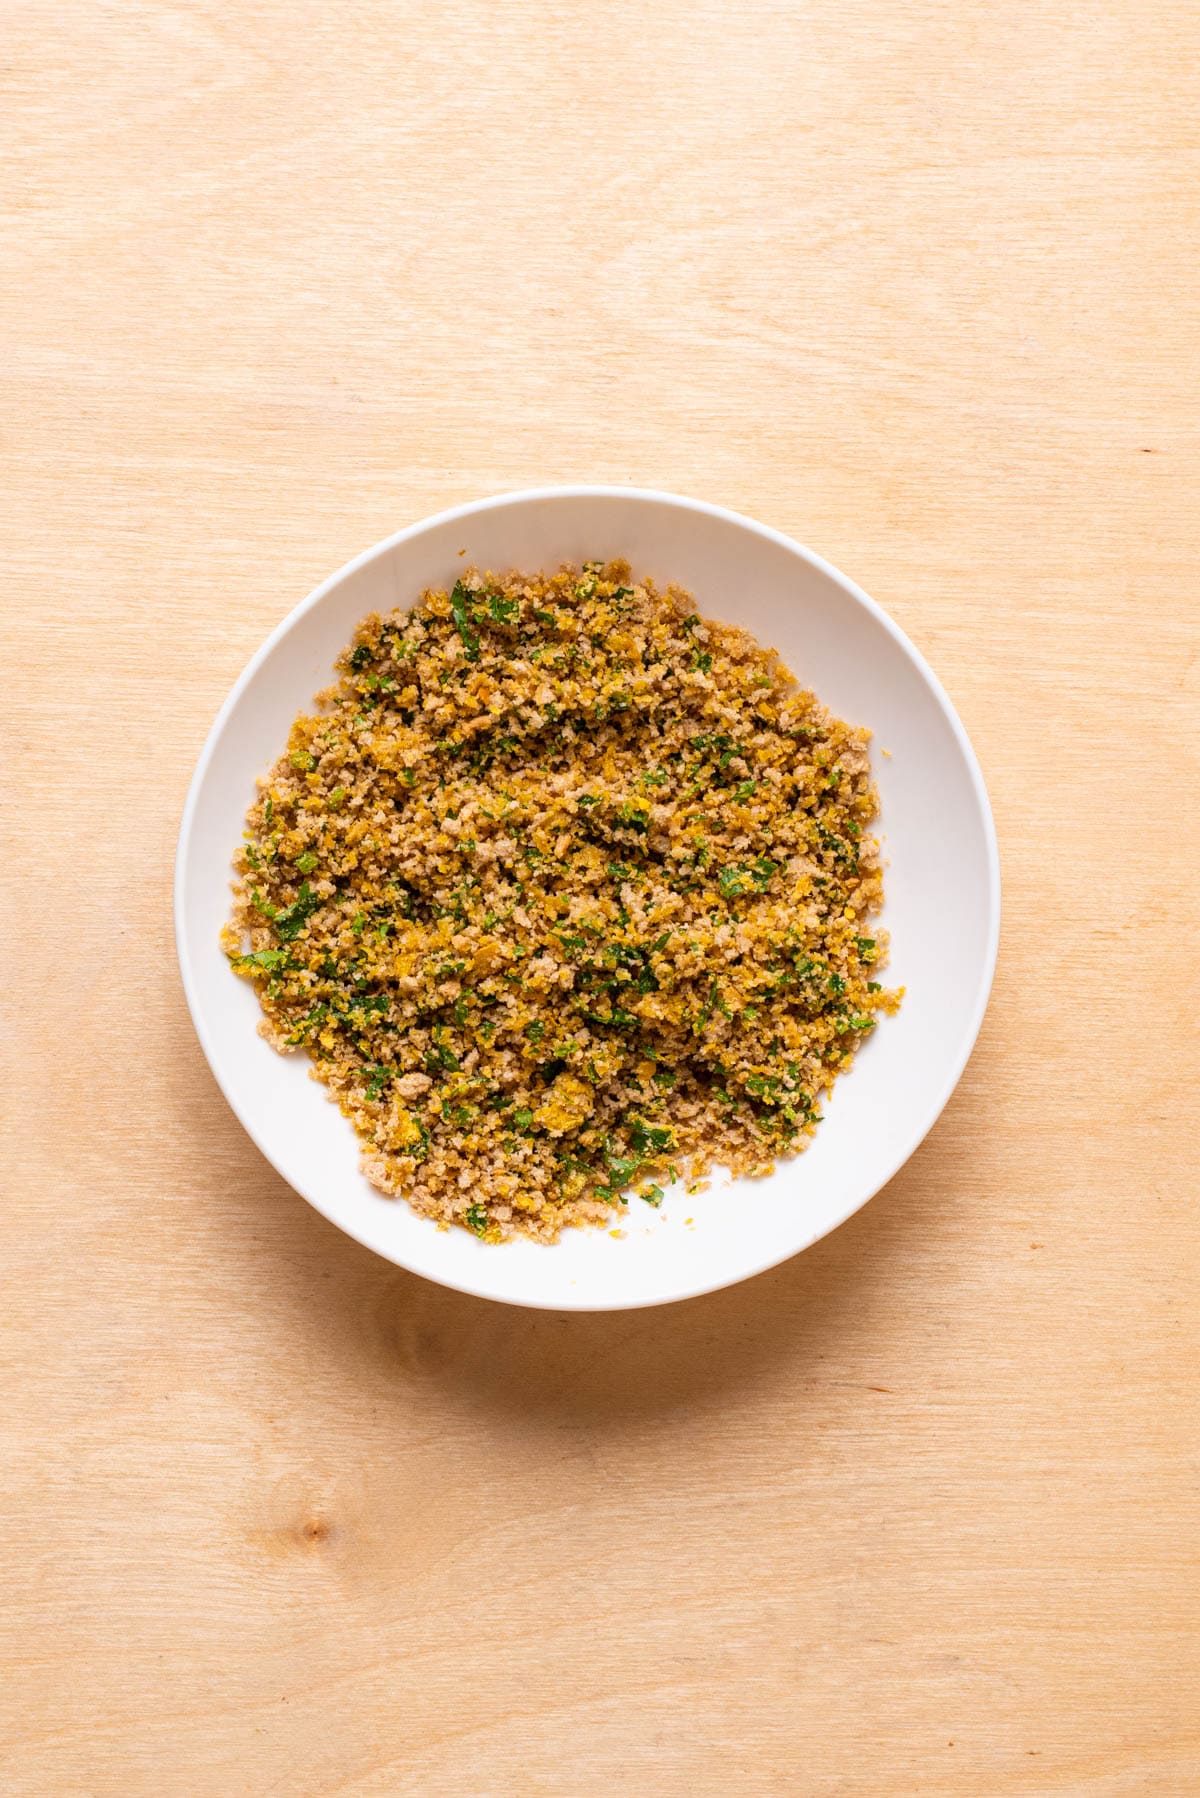 Panko-parsley mixture in a bowl.